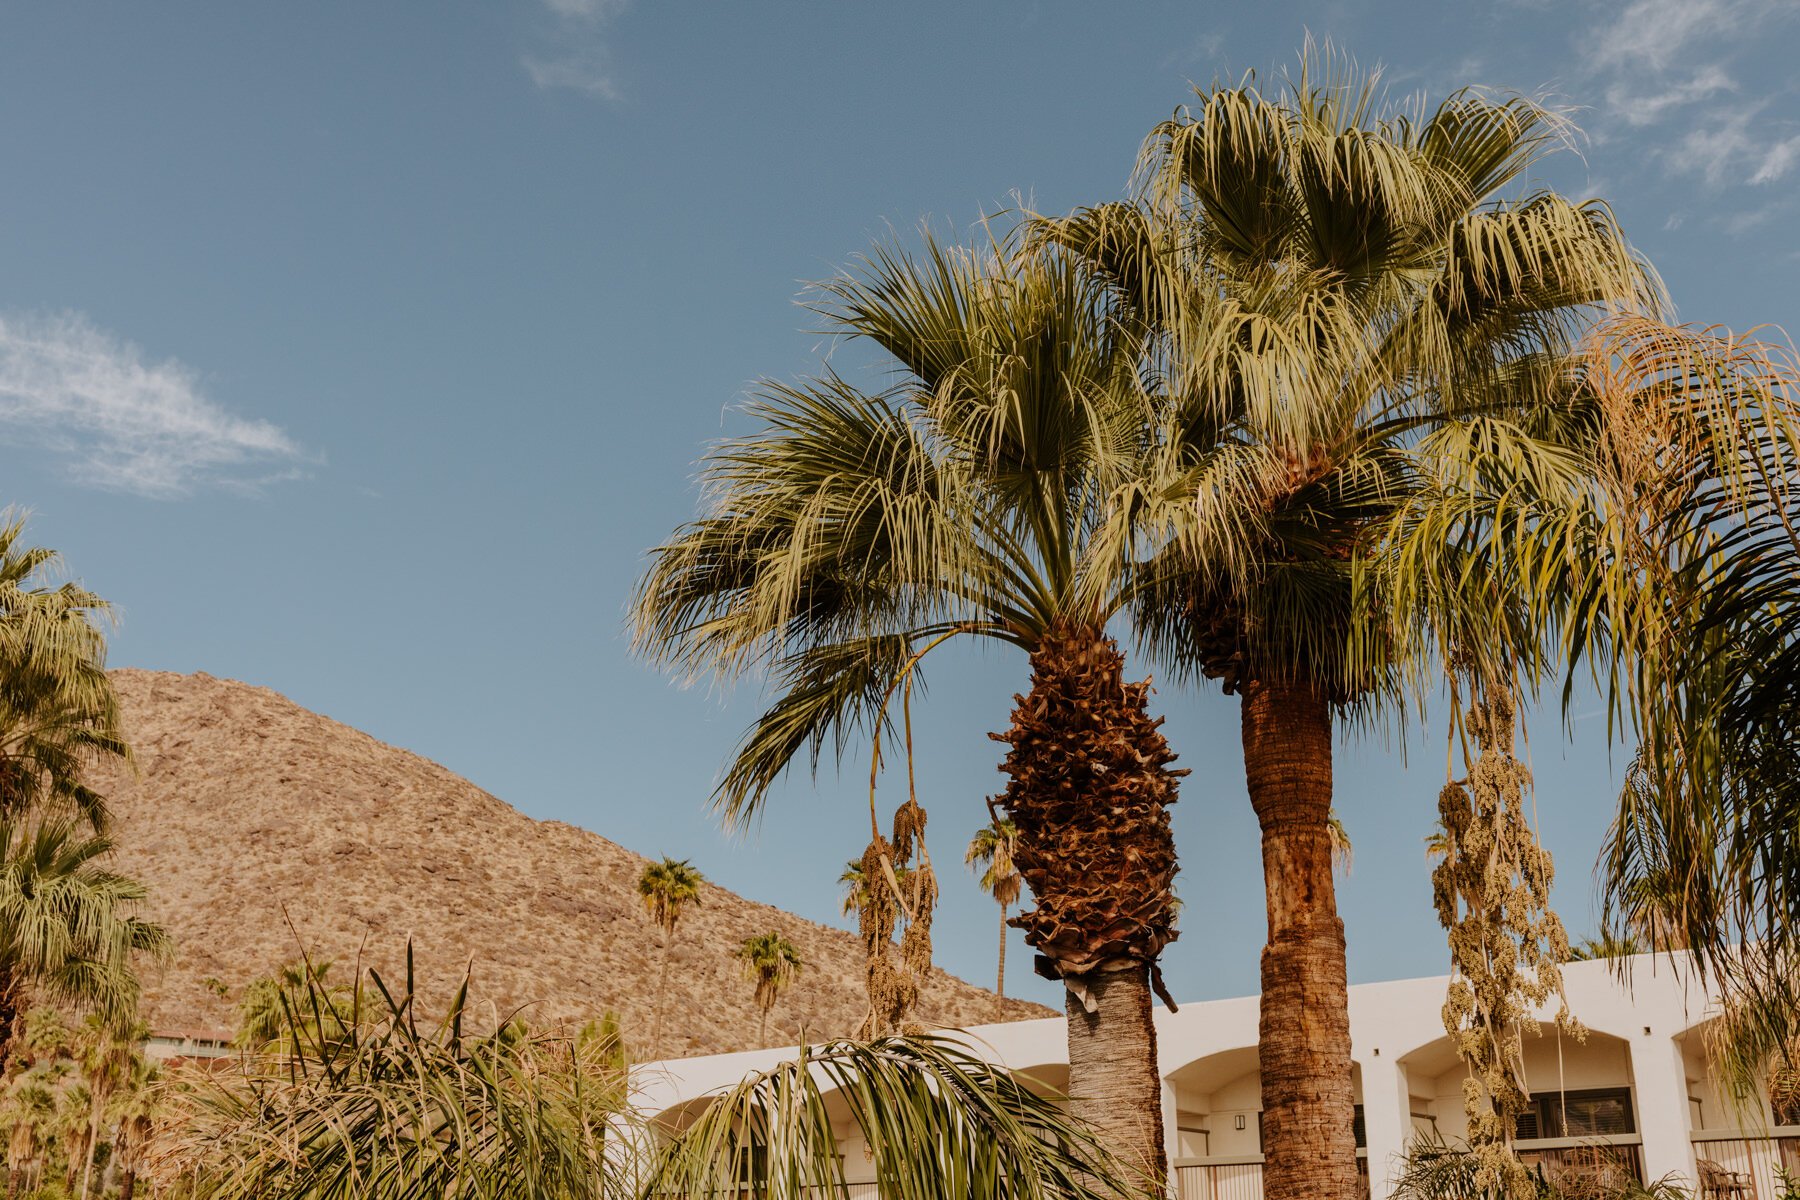  Palm Springs Wedding Photographer | Palm Mountain Resort and Spa | Tida Svy Photography 